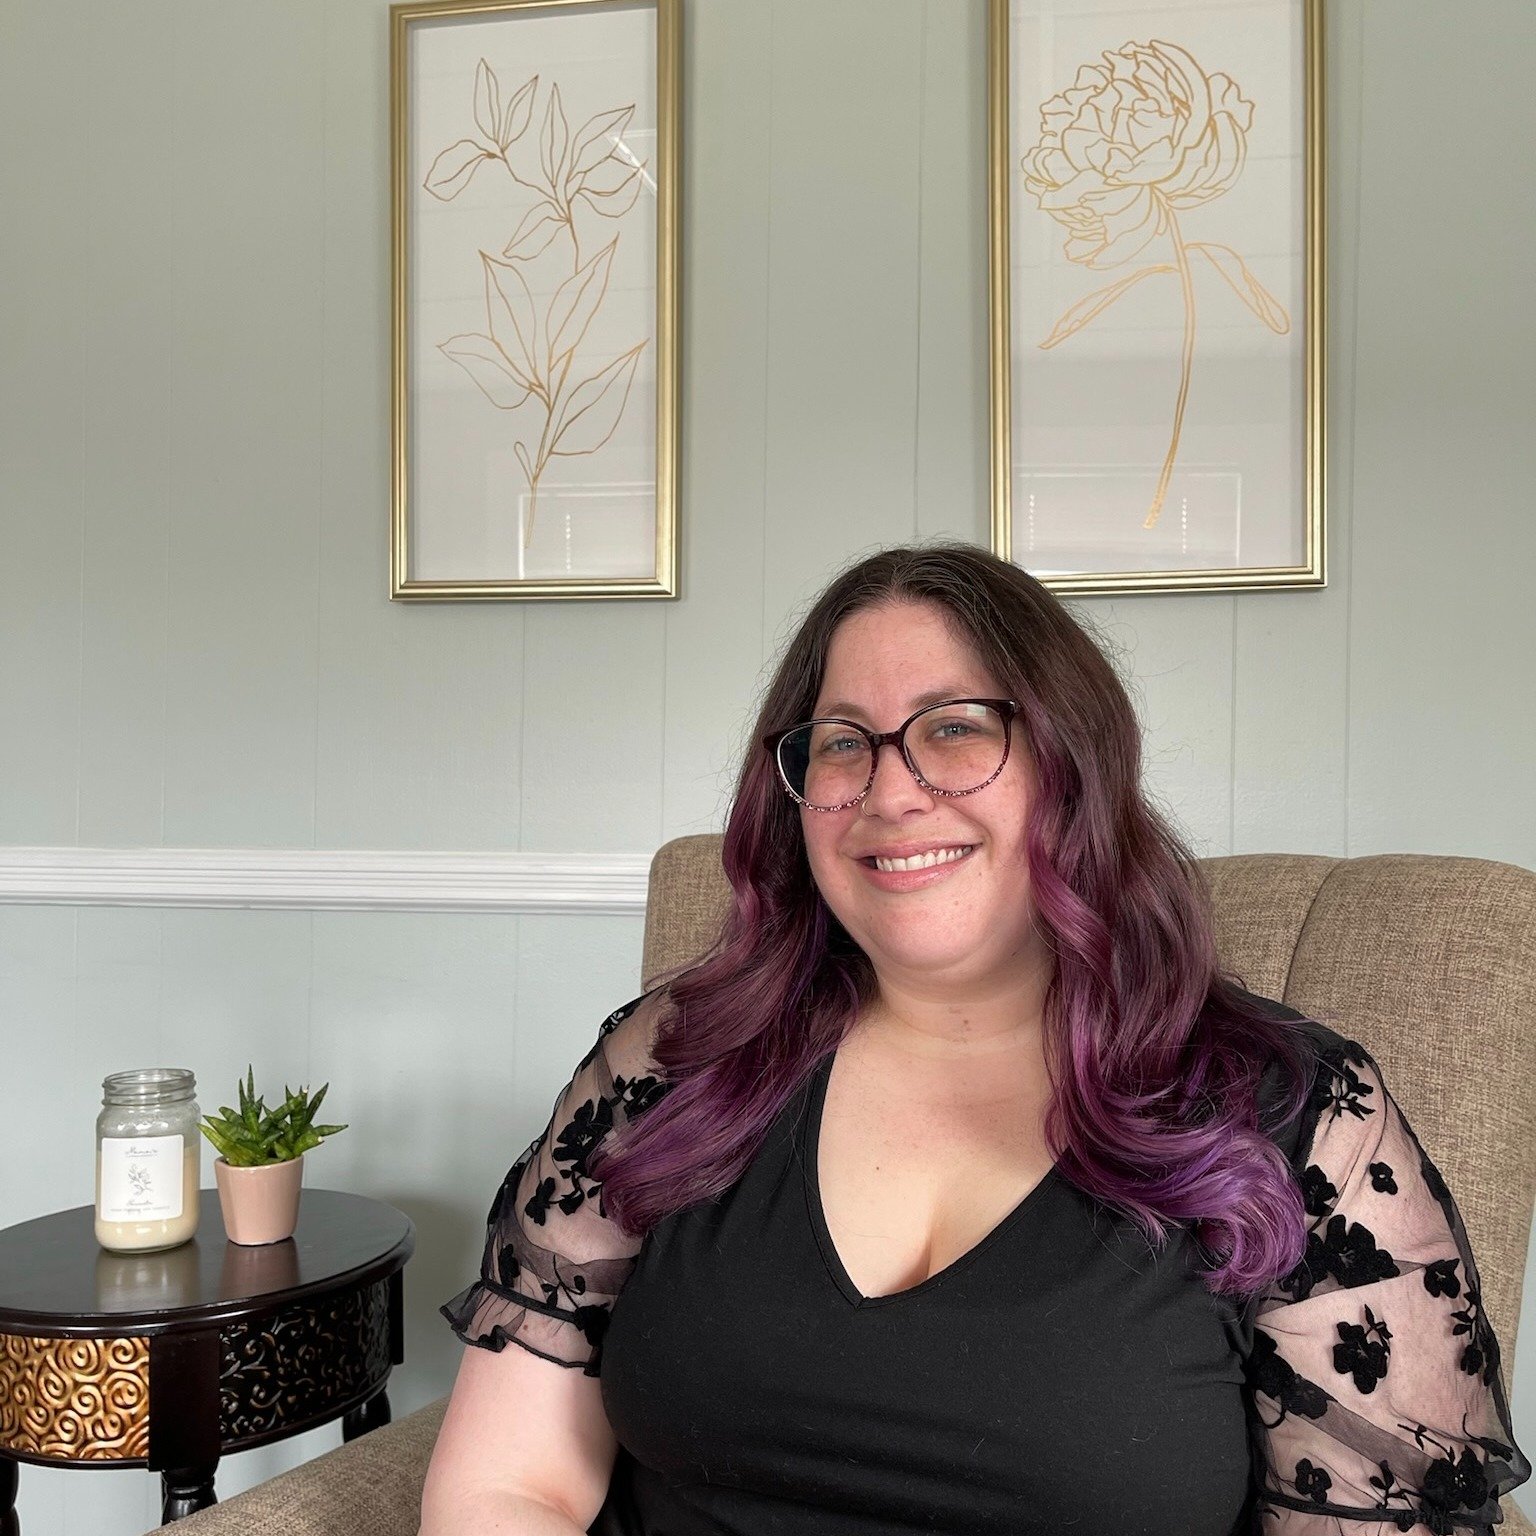 Therapist Feature:  Allison Herman LPC
Allie is a natural therapist with a focus on adolescent treatment.

Allison Herman LPC has obtained her Master of Science degree from Montclair State University in Clinical Mental Health Counseling. 

I have wor